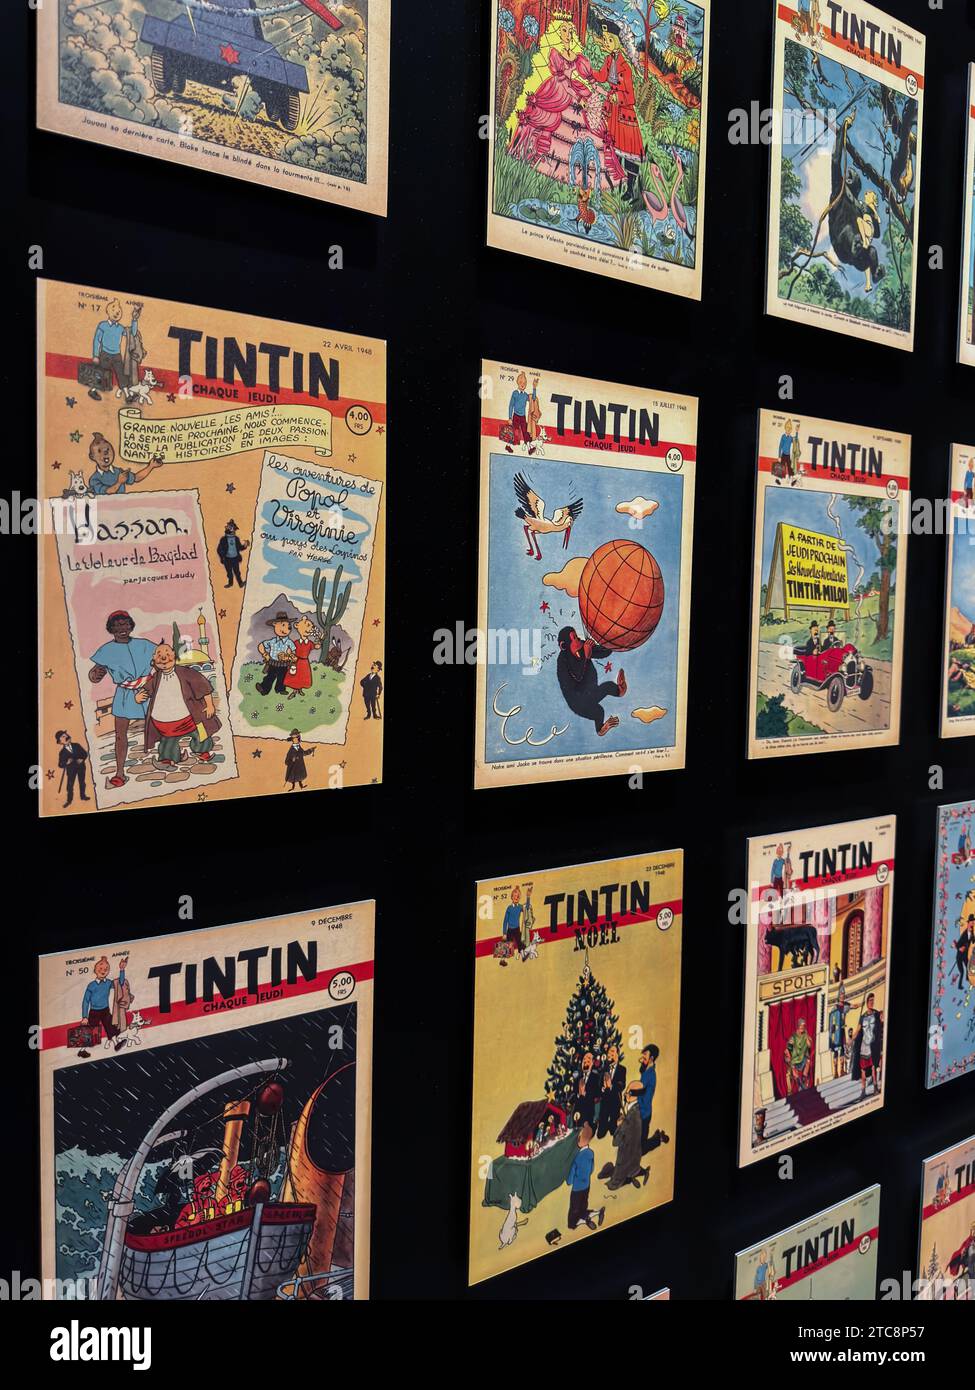 Objectif Lune - Poster - The Tintin Shop UK